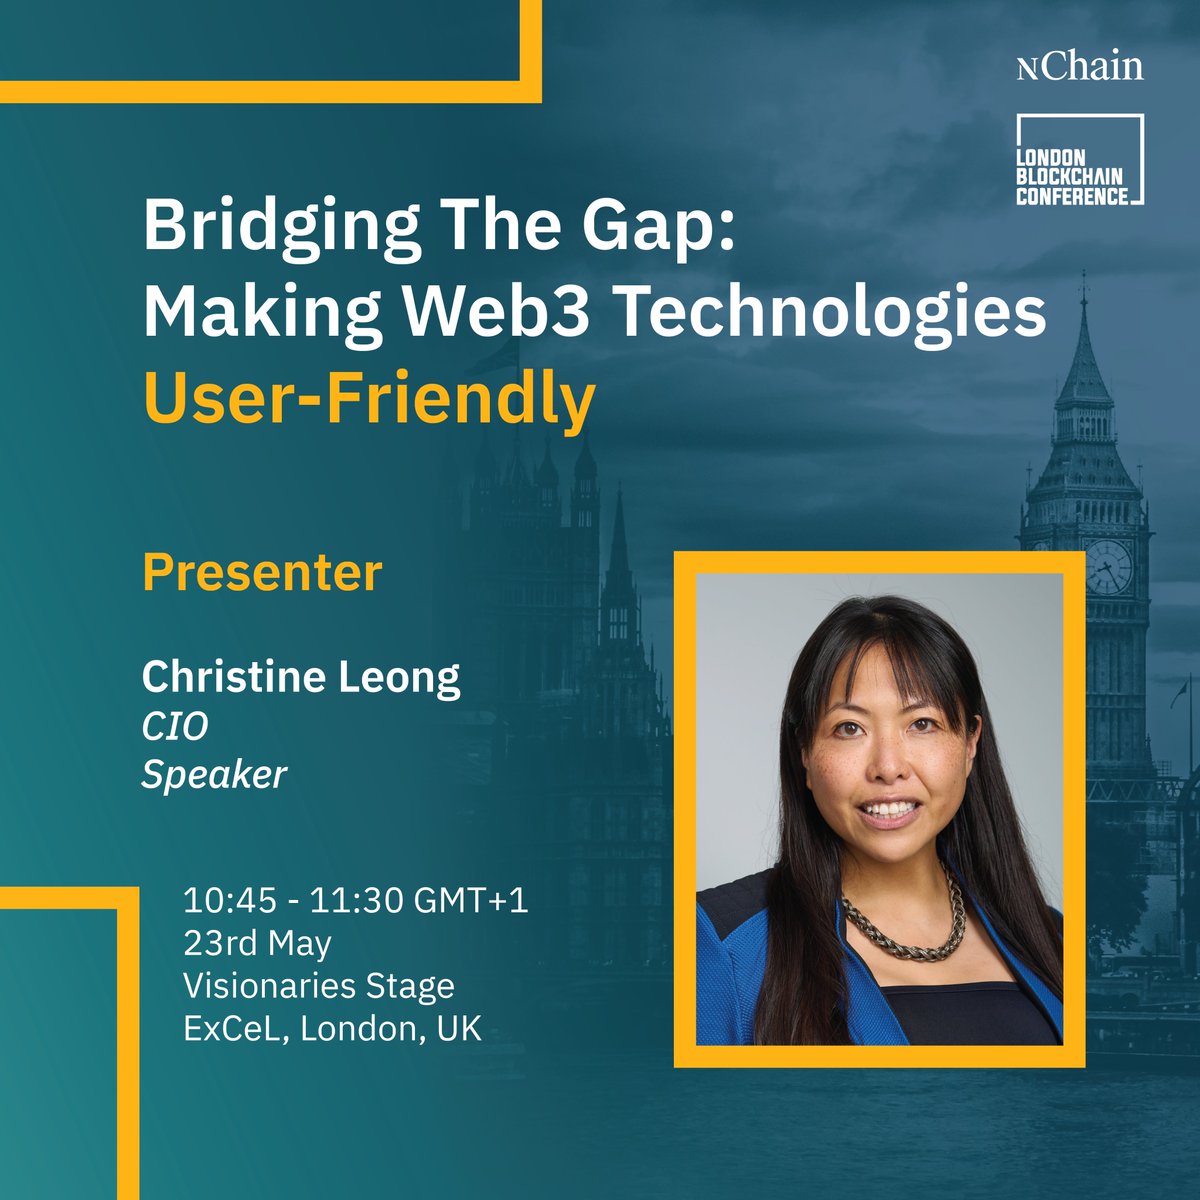 Our Chief Information Officer Christine Leong @leong_identity will be speaking at the upcoming London Blockchain Conference @LDN_Blockchain on May 23, 2024. Christine will present 'Bridging the Gap: Making Web3 Technologies User-Friendly', which will look at innovative